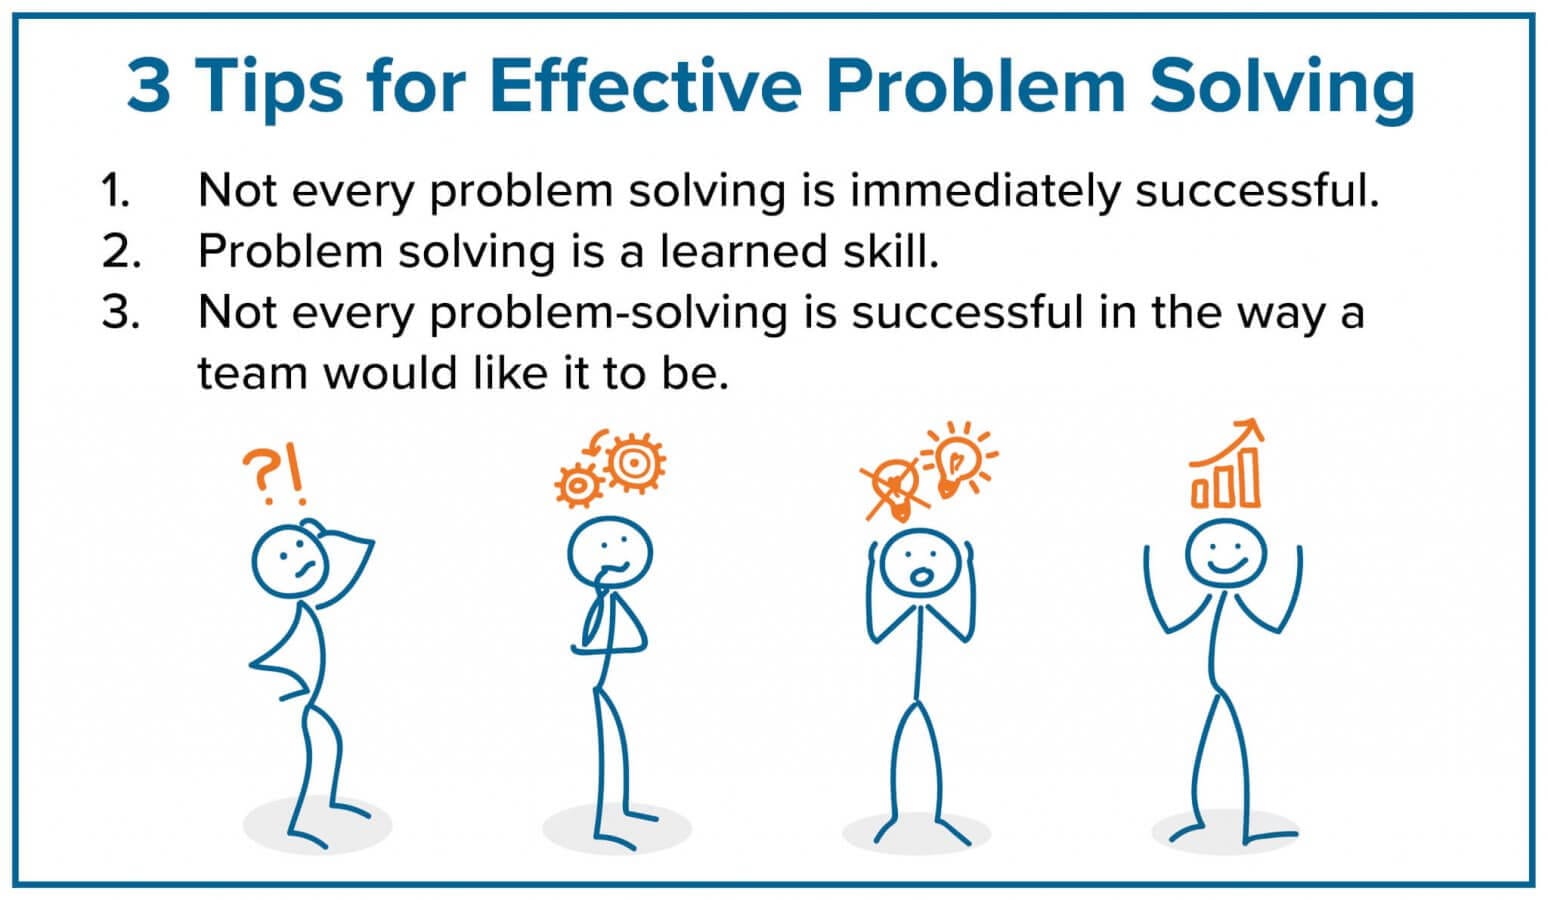 how can one improve problem solving skills